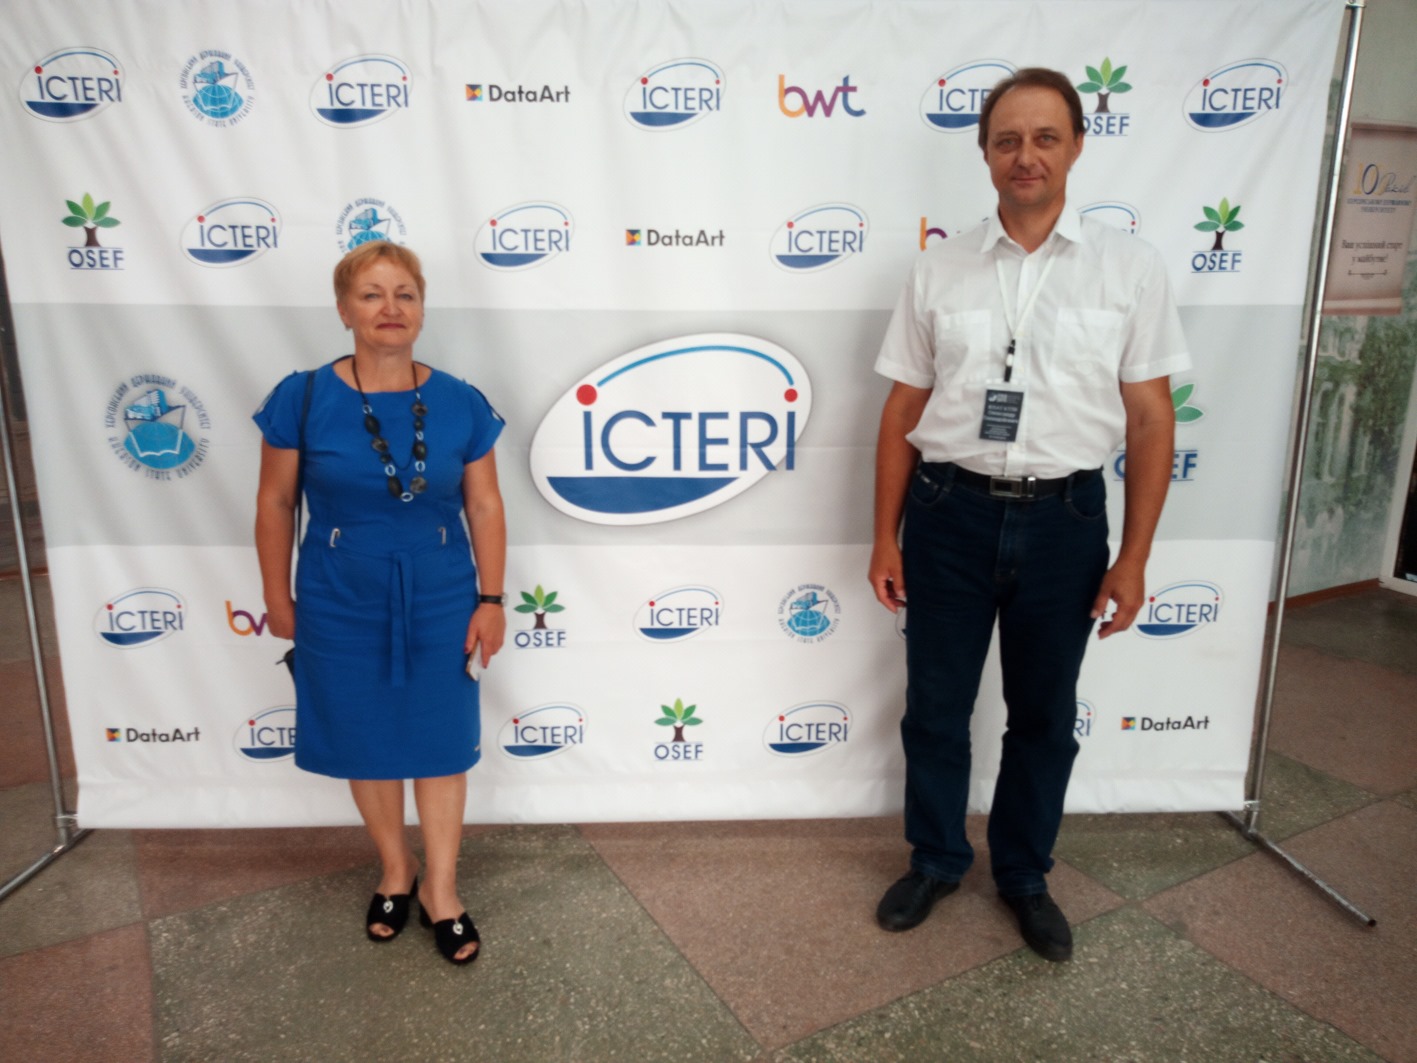 International Conference on ICT in Education, Research, and Industrial Applications (ICTERI 2021)